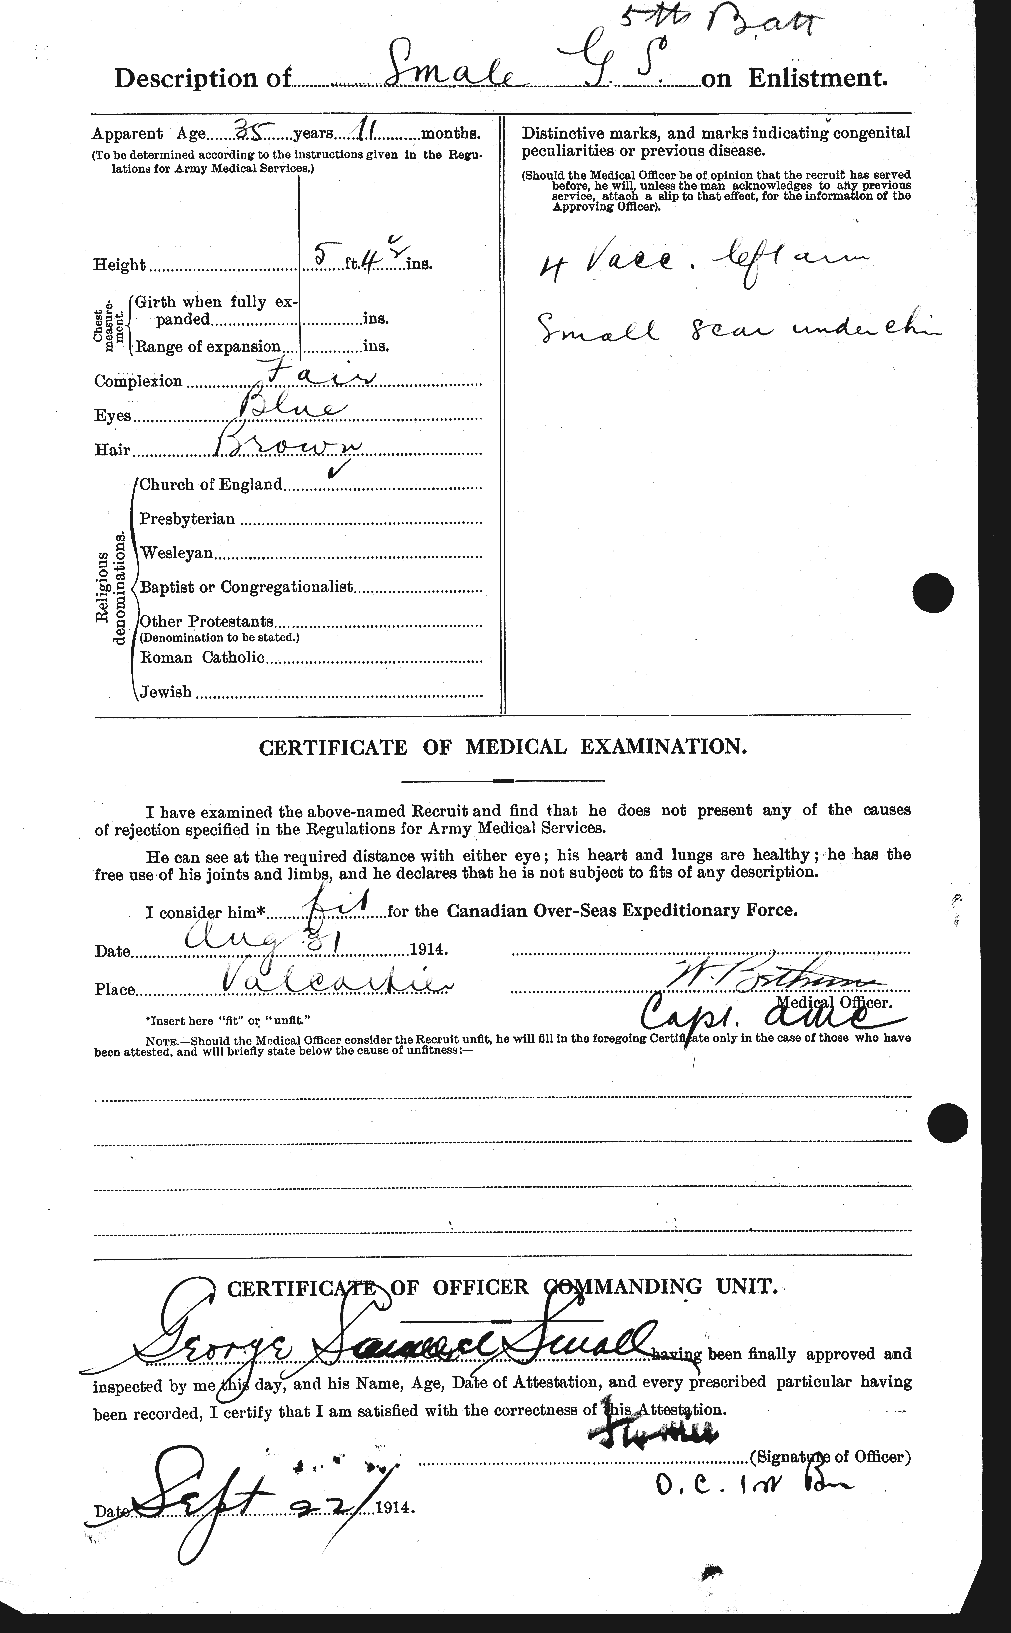 Personnel Records of the First World War - CEF 097644b